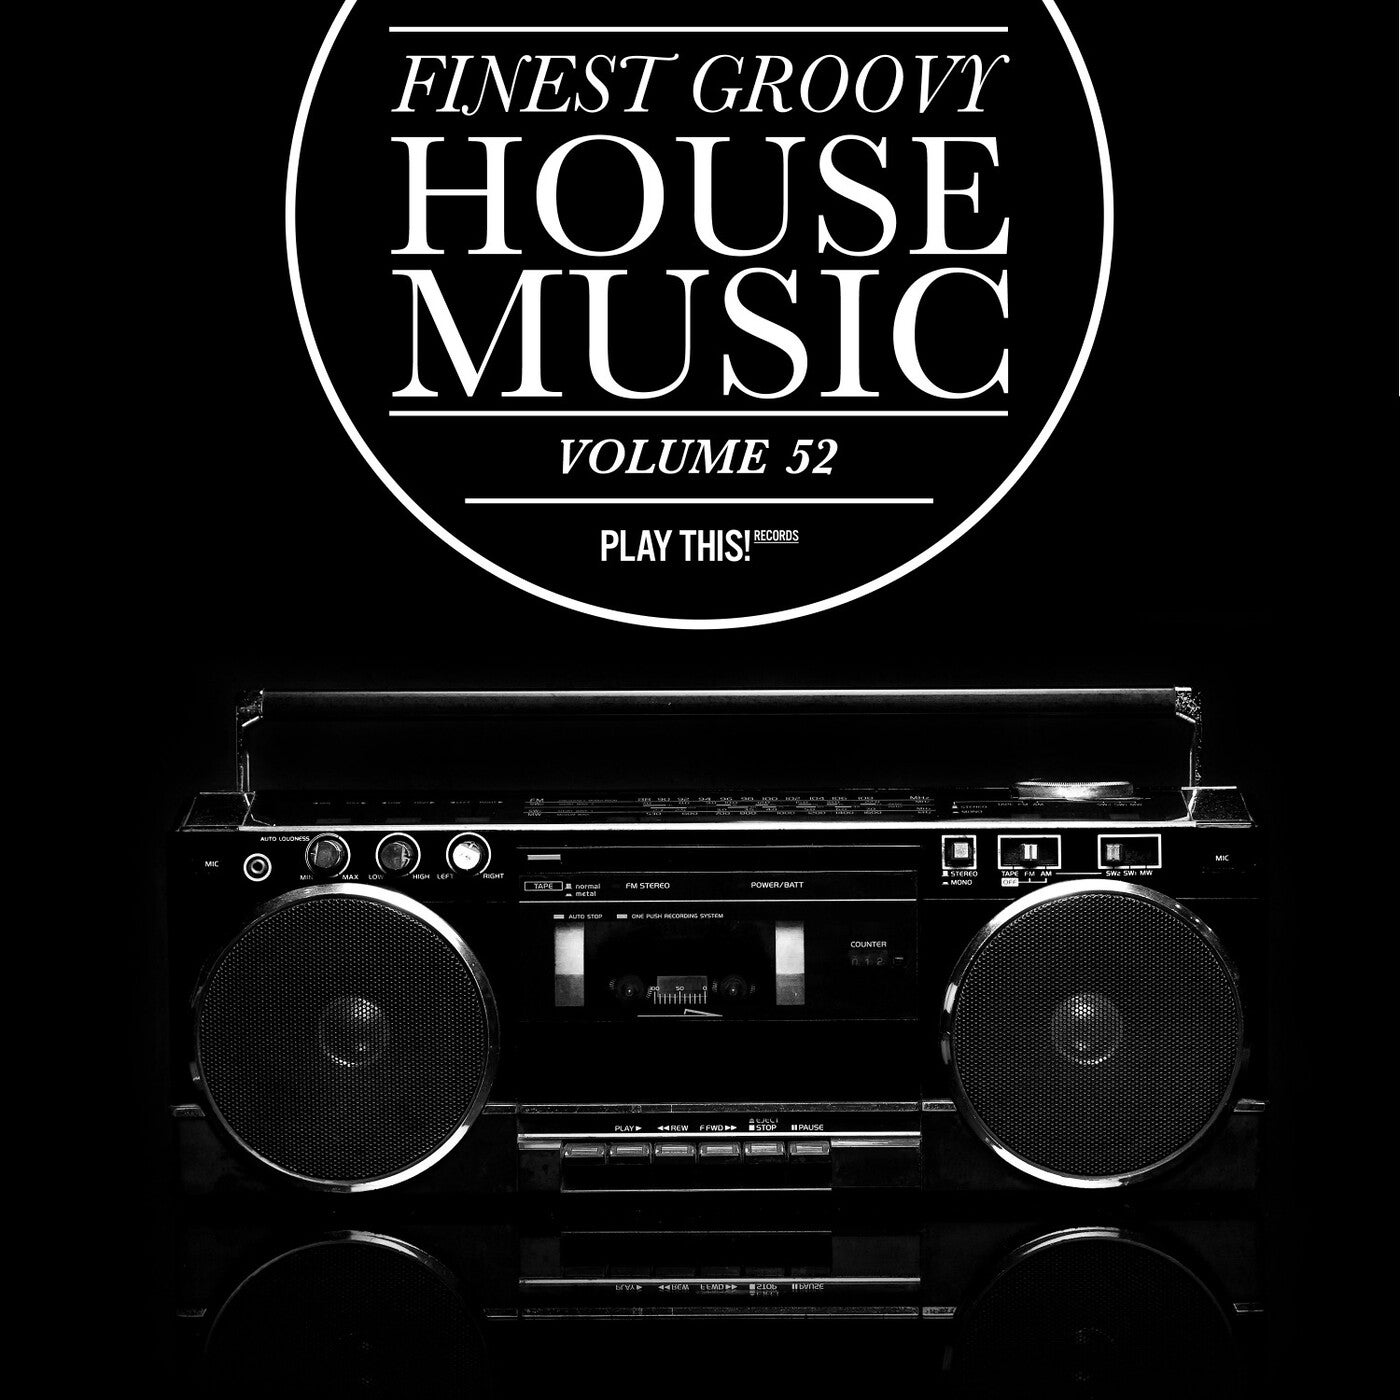 Finest Groovy House Music, Vol. 52